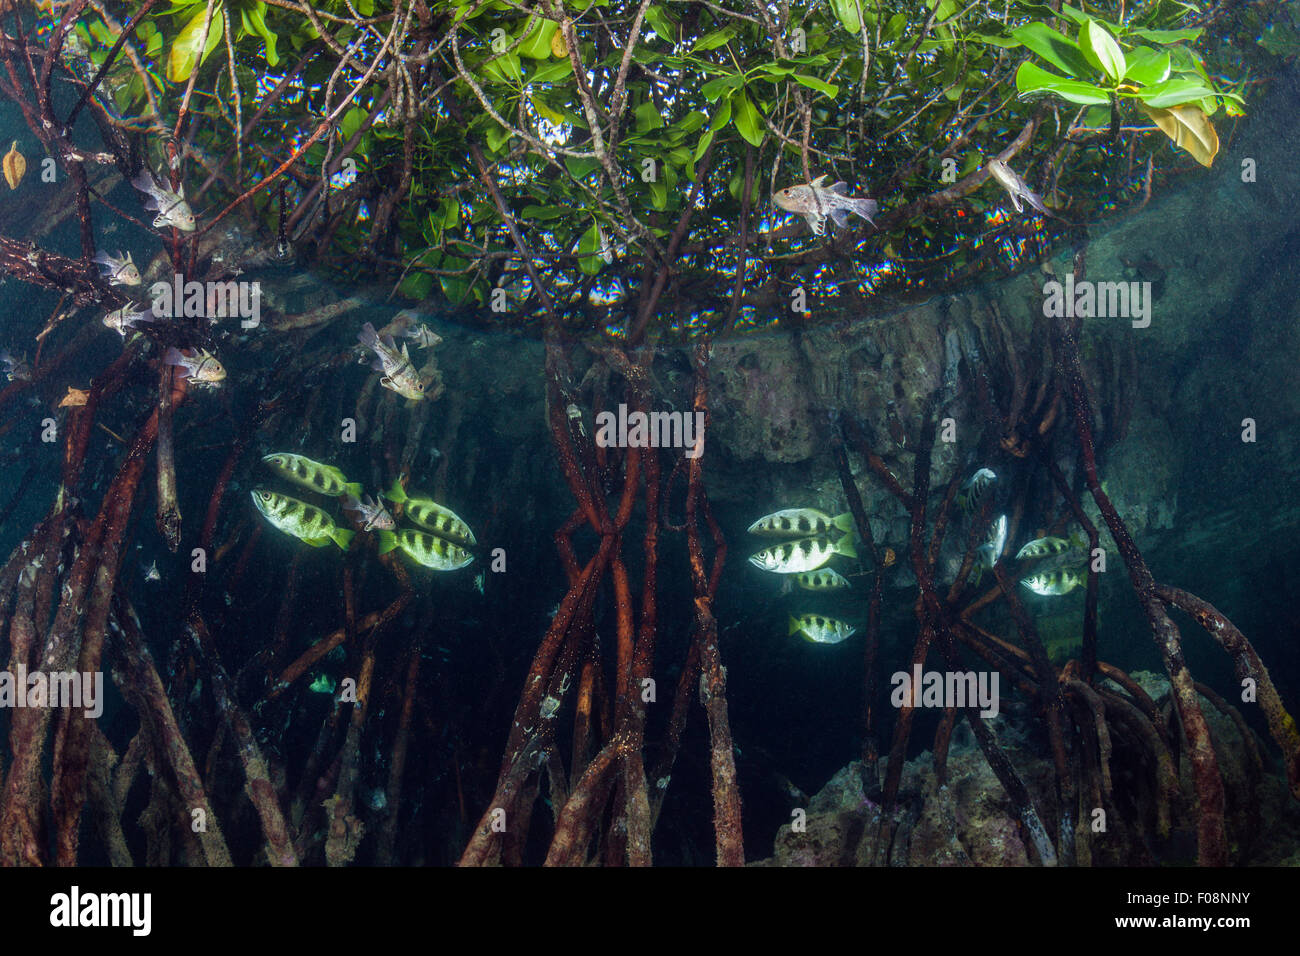 Banded Archerfish in Mangroves, Toxotes jaculatrix, Russell Islands, Solomon Islands Stock Photo